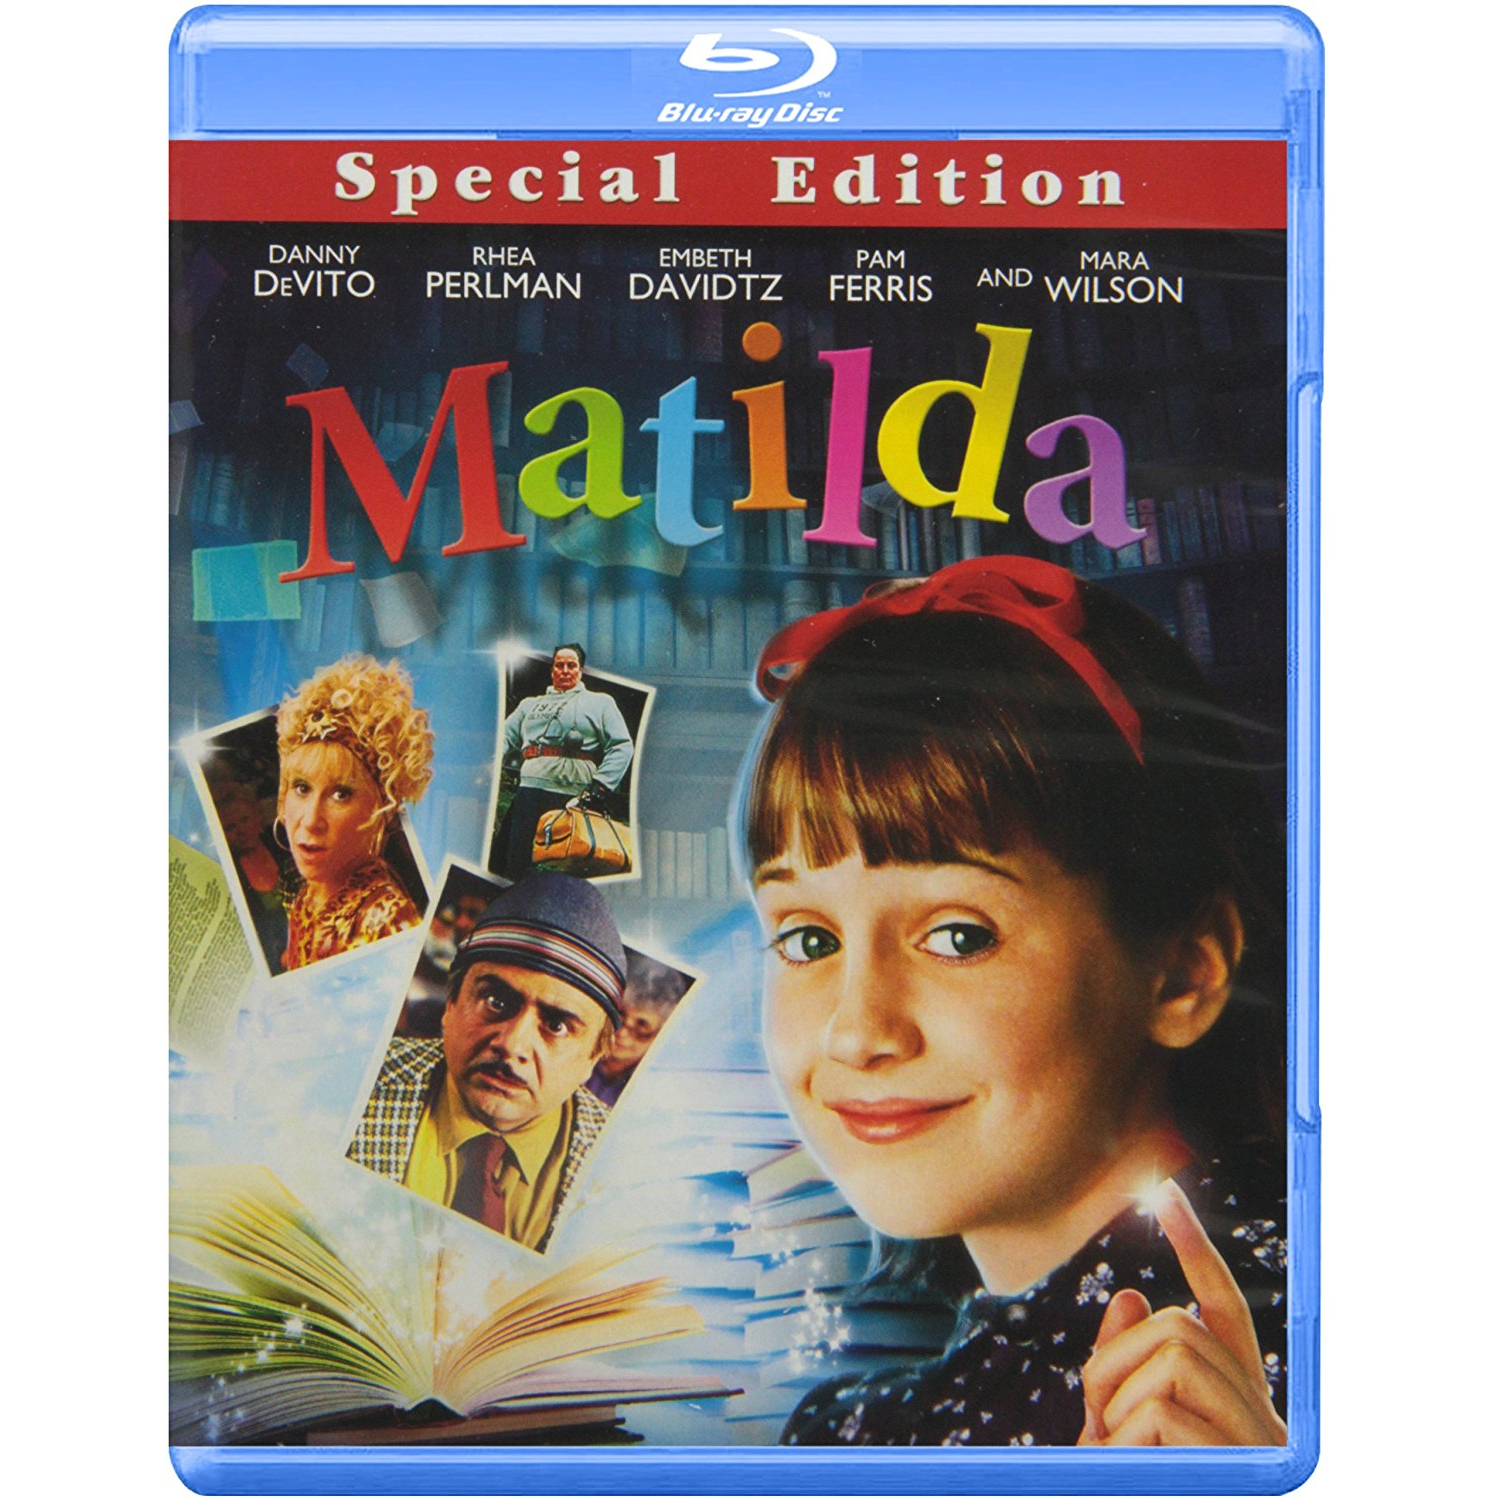 Amazon: Matilda on Blu-ray Only $8.99 or DVD for $3.99!